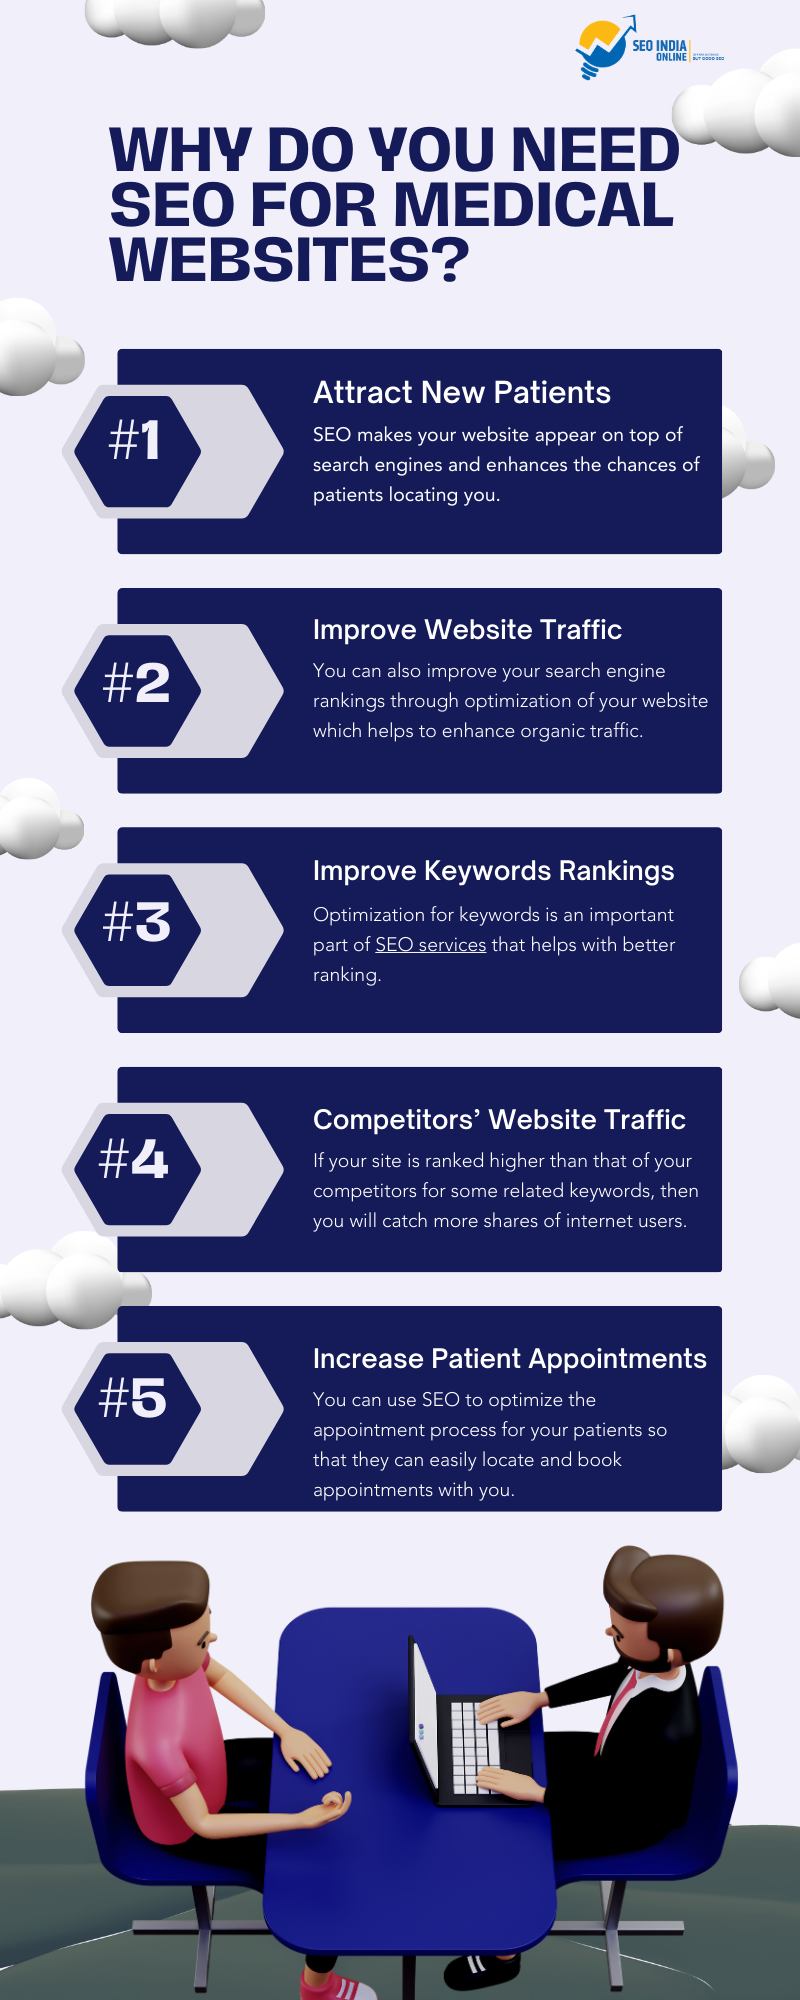 Why Do You Need SEO For Medical Websites